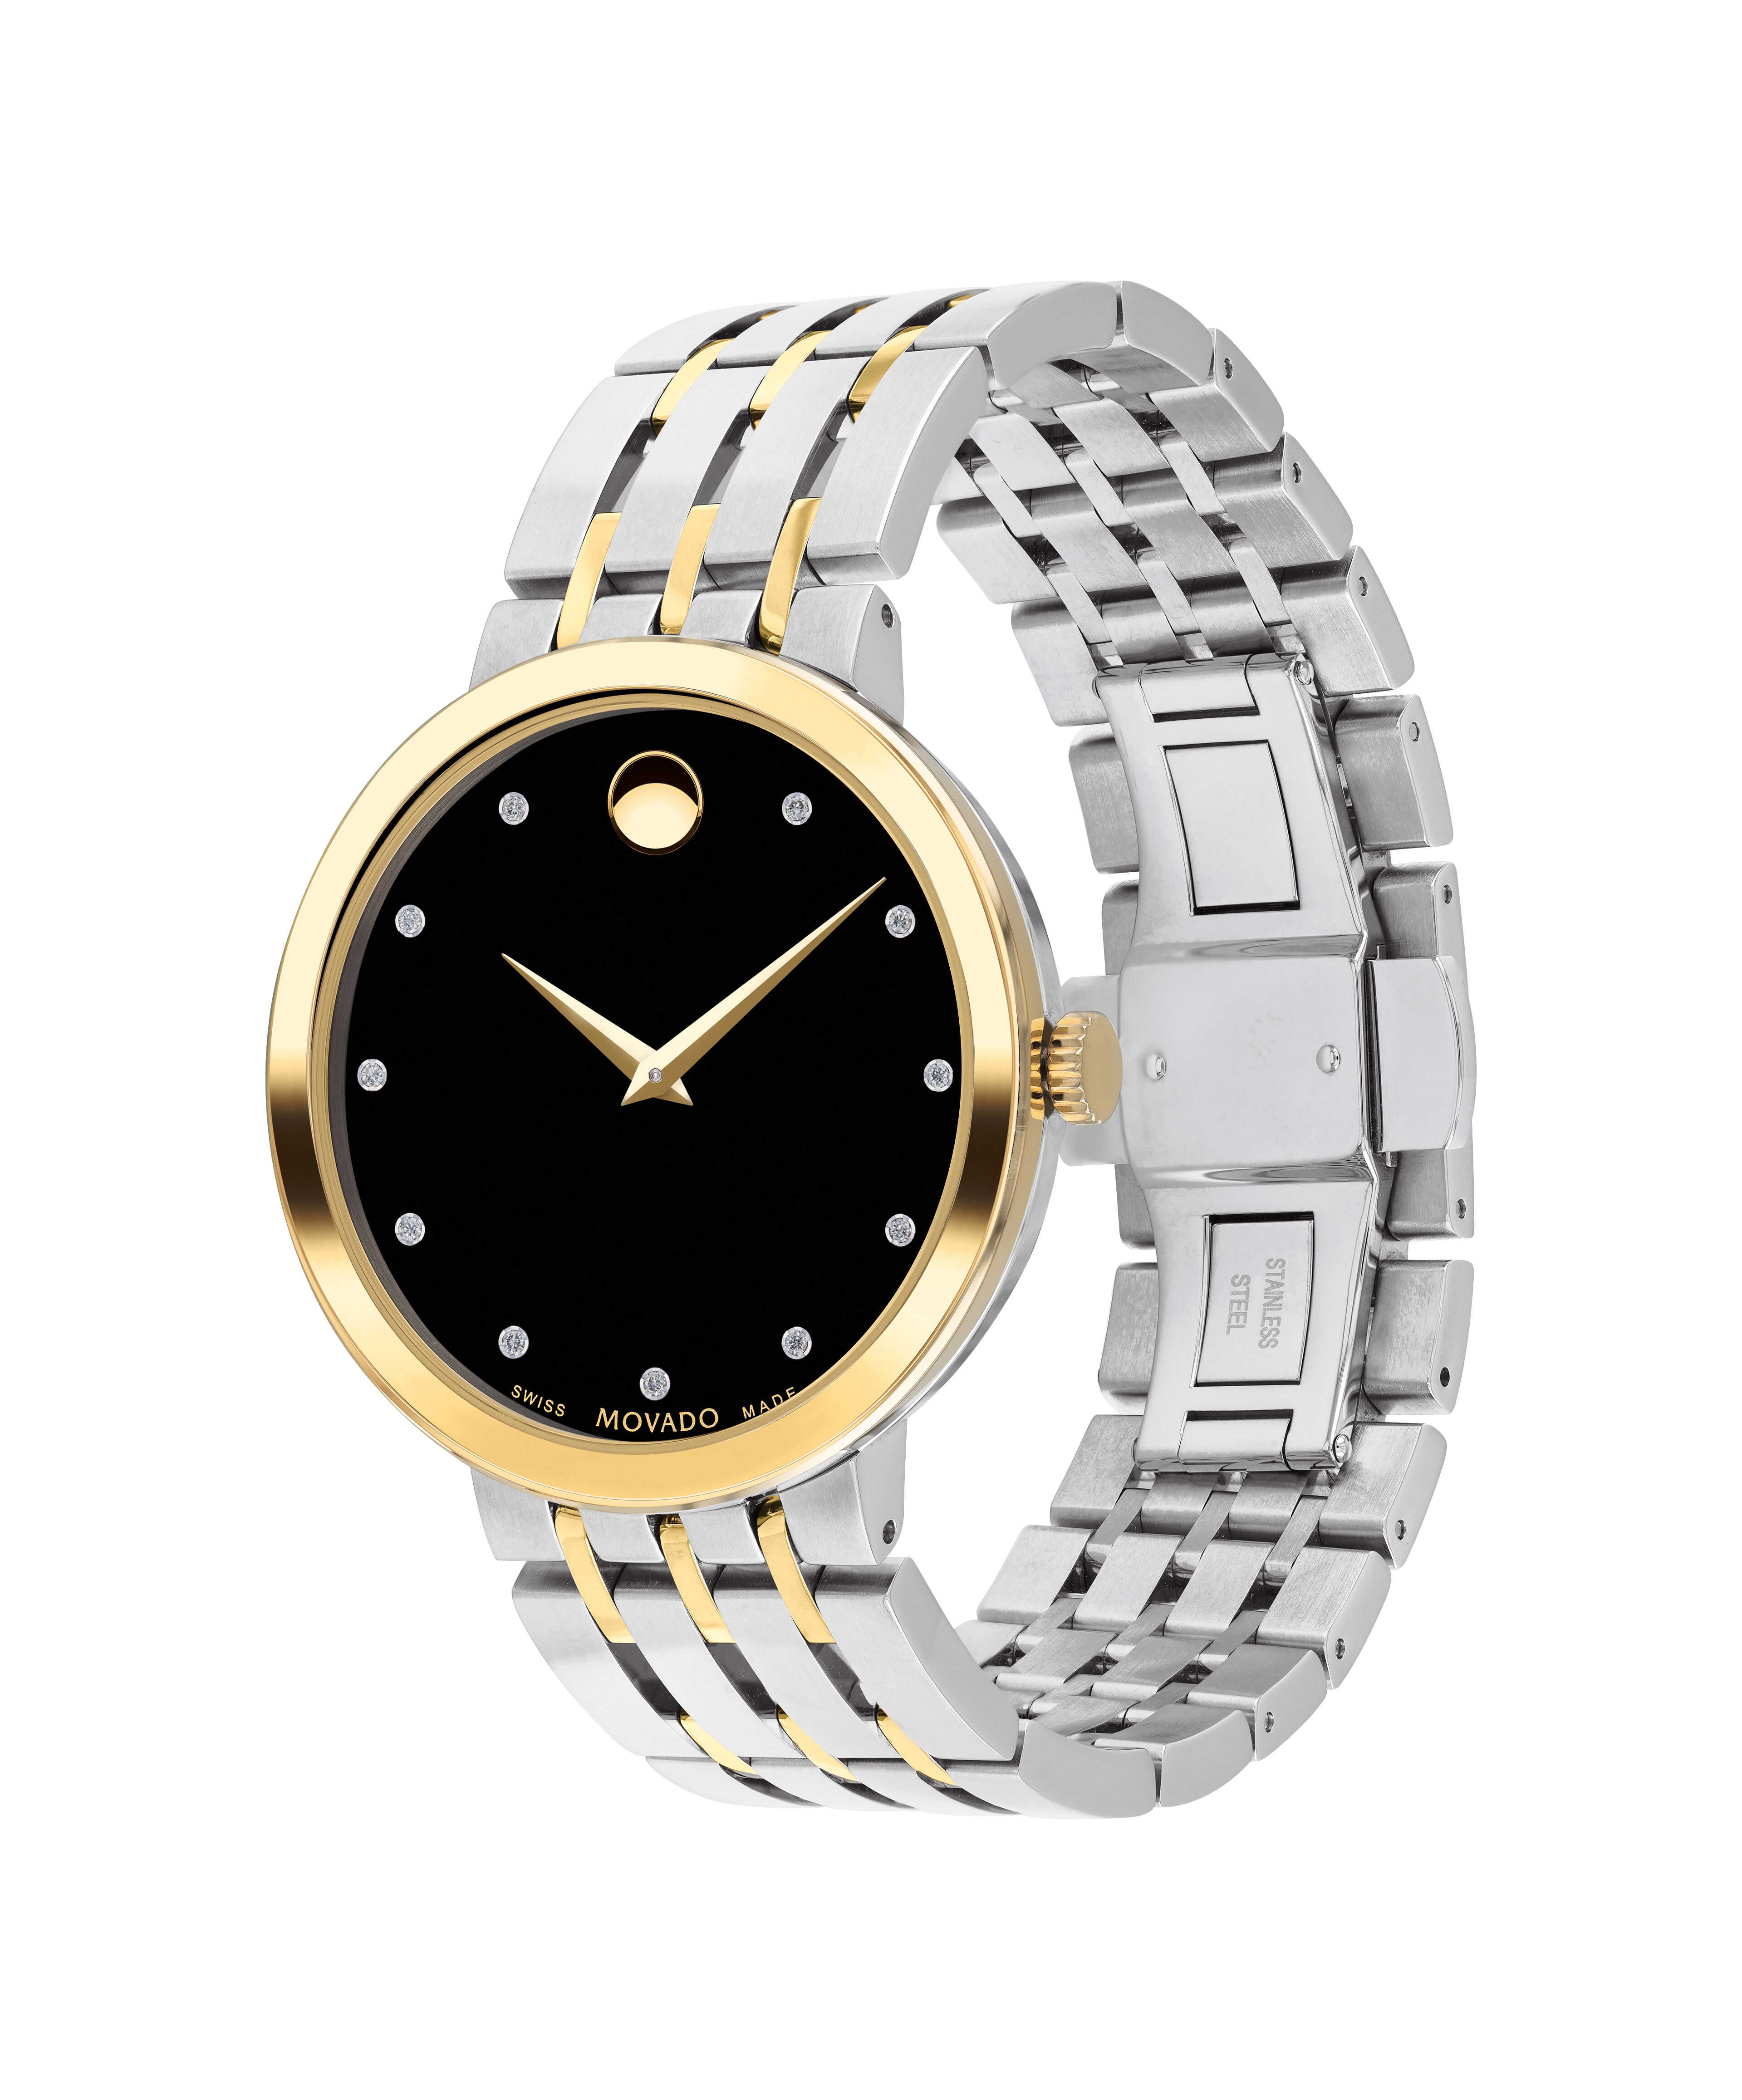 Movado Museum Watch Women's Watch Steel Gold Plated Top Condition 34mm 87.45.662